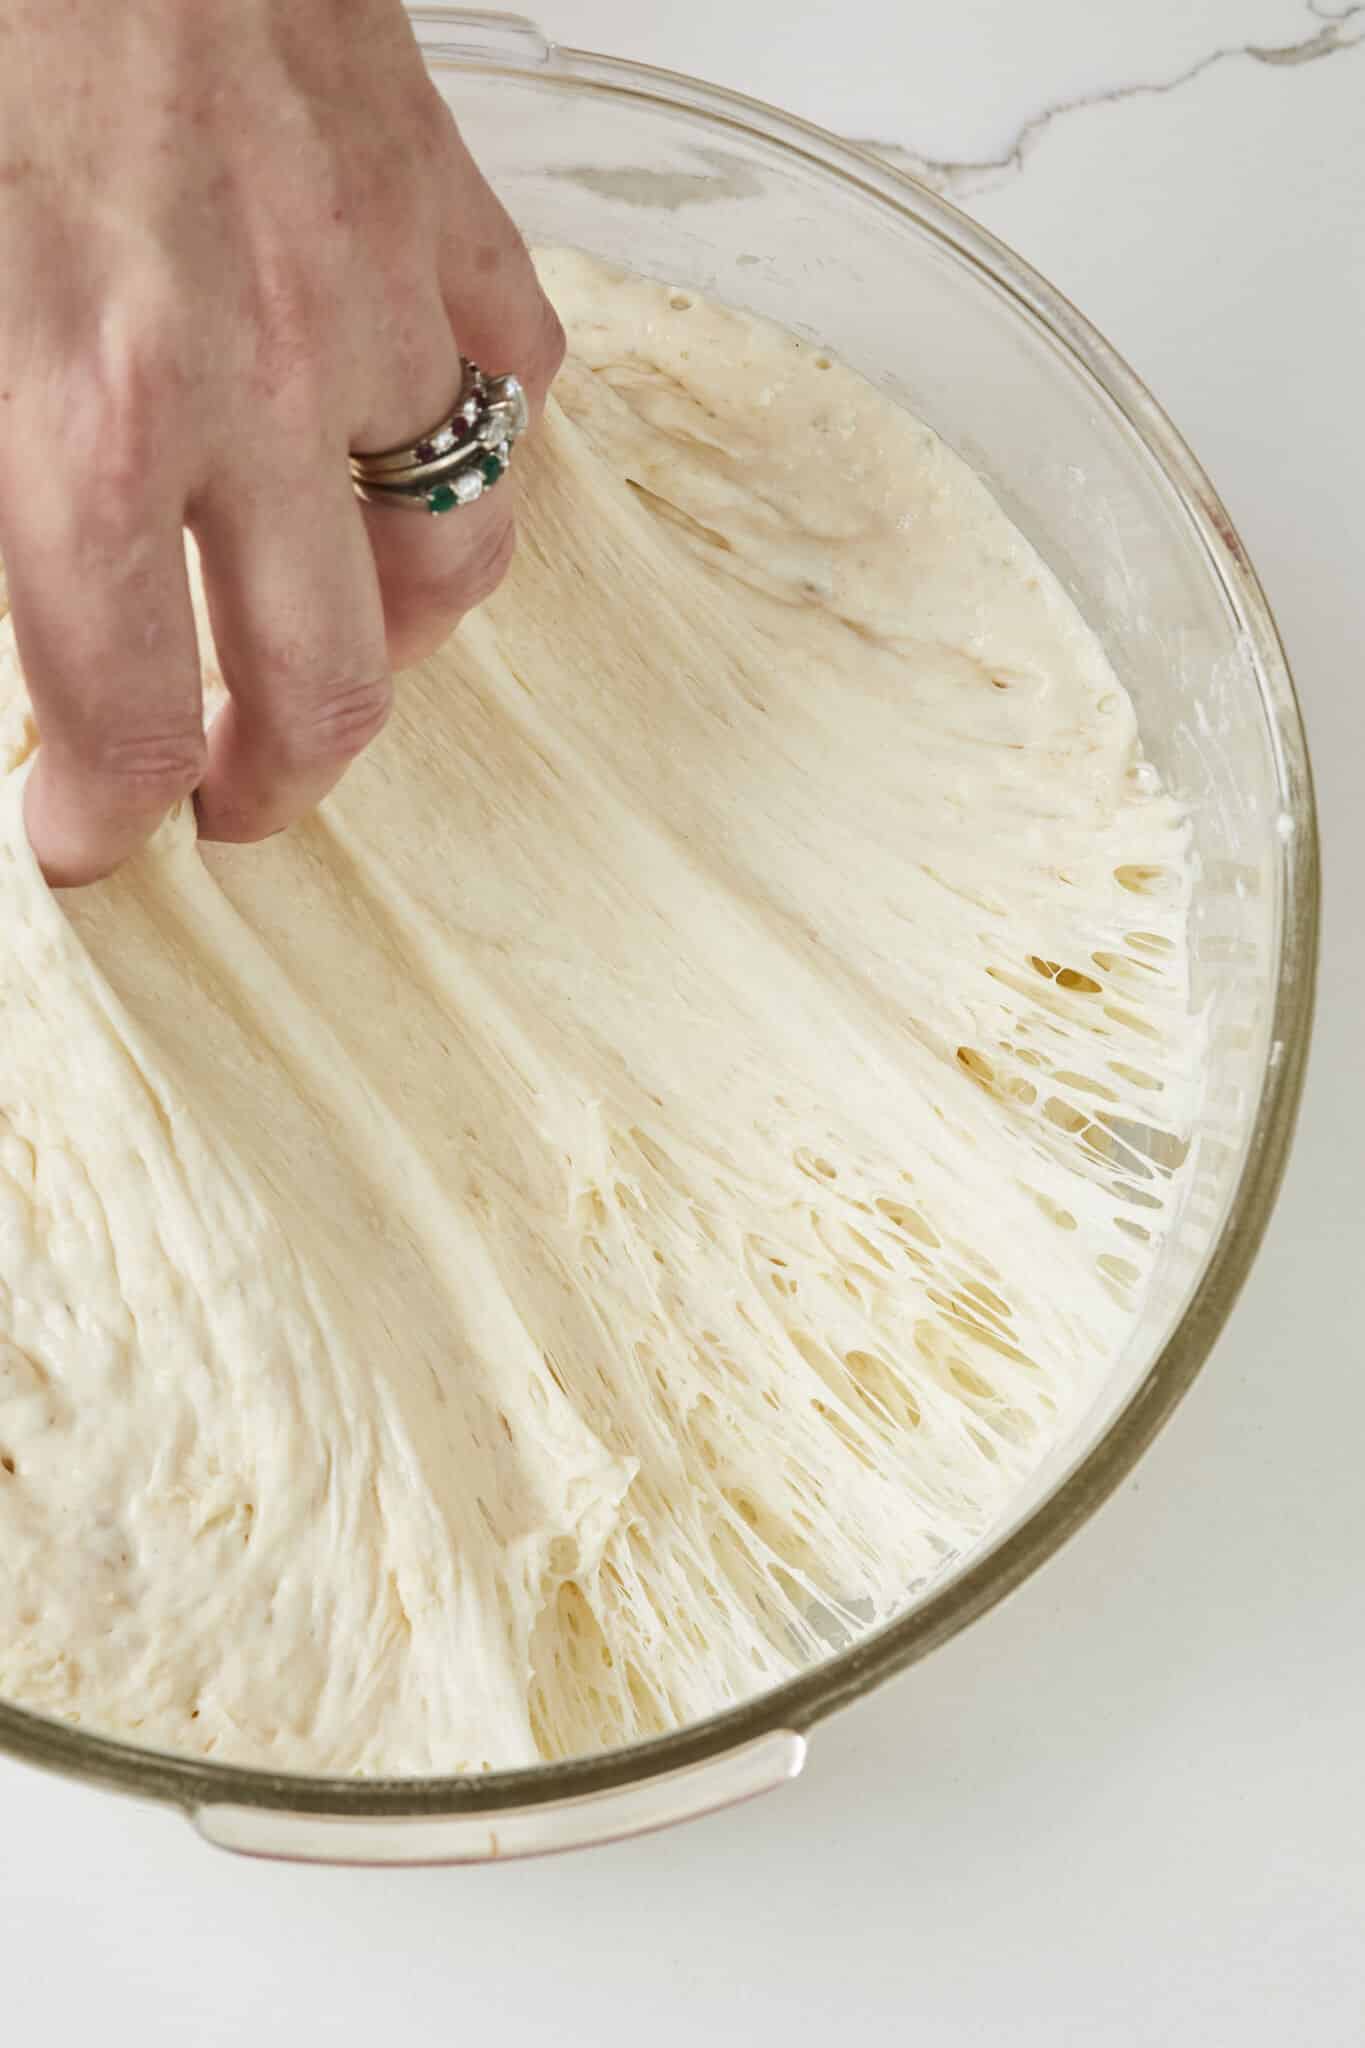 Step-by step instructions on how to make the No Knead Sandwich Bread: after the bulk fermentation the dough has developed loads of gluten strands and air pockets. Knocking out the air will strengthen the dough.